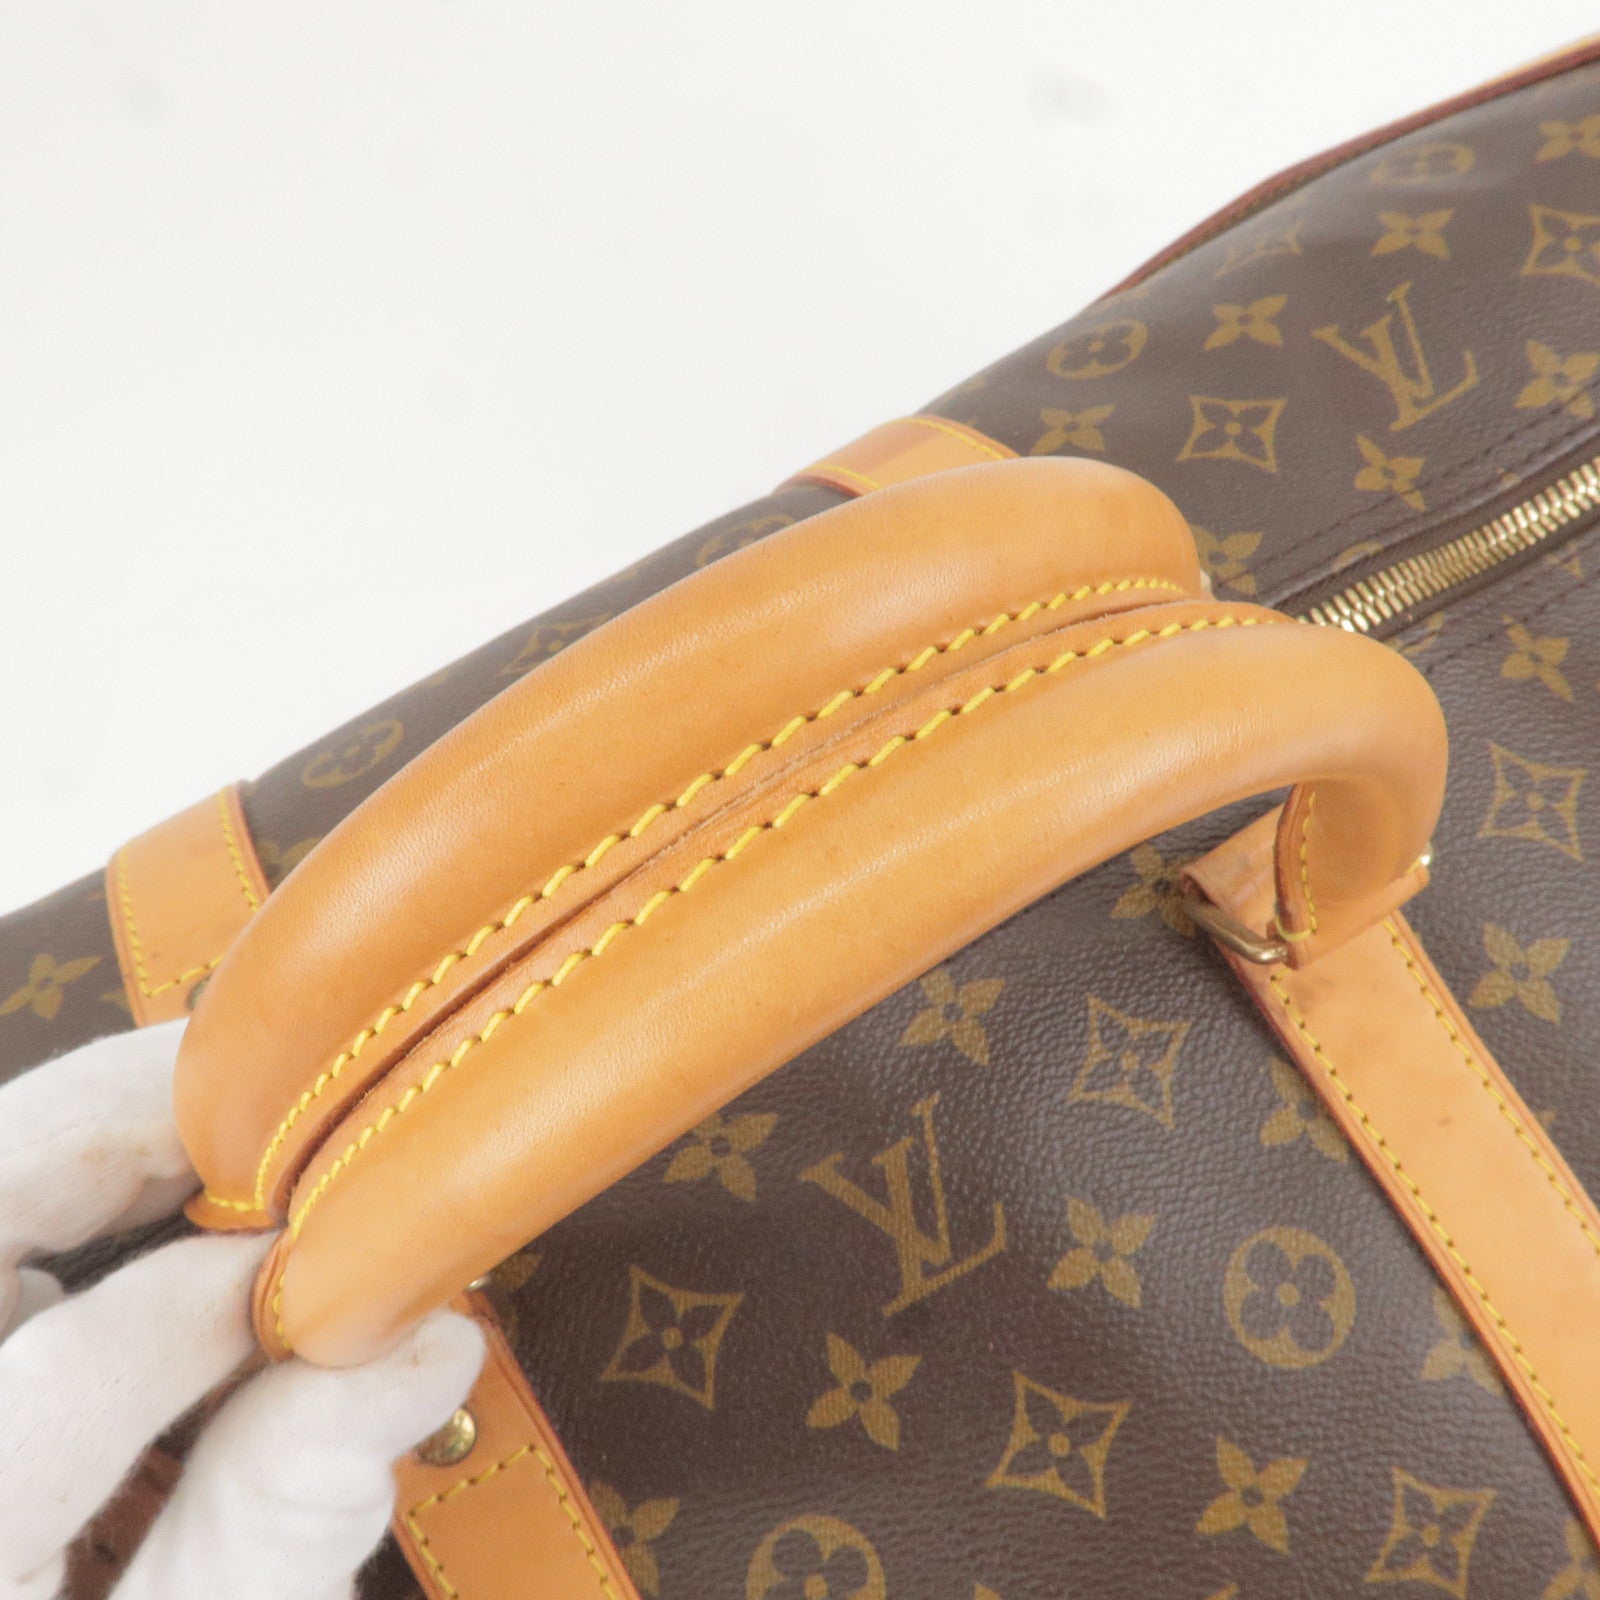 Louis Vuitton Pre-Owned Keepall 60 Bag Monogram at